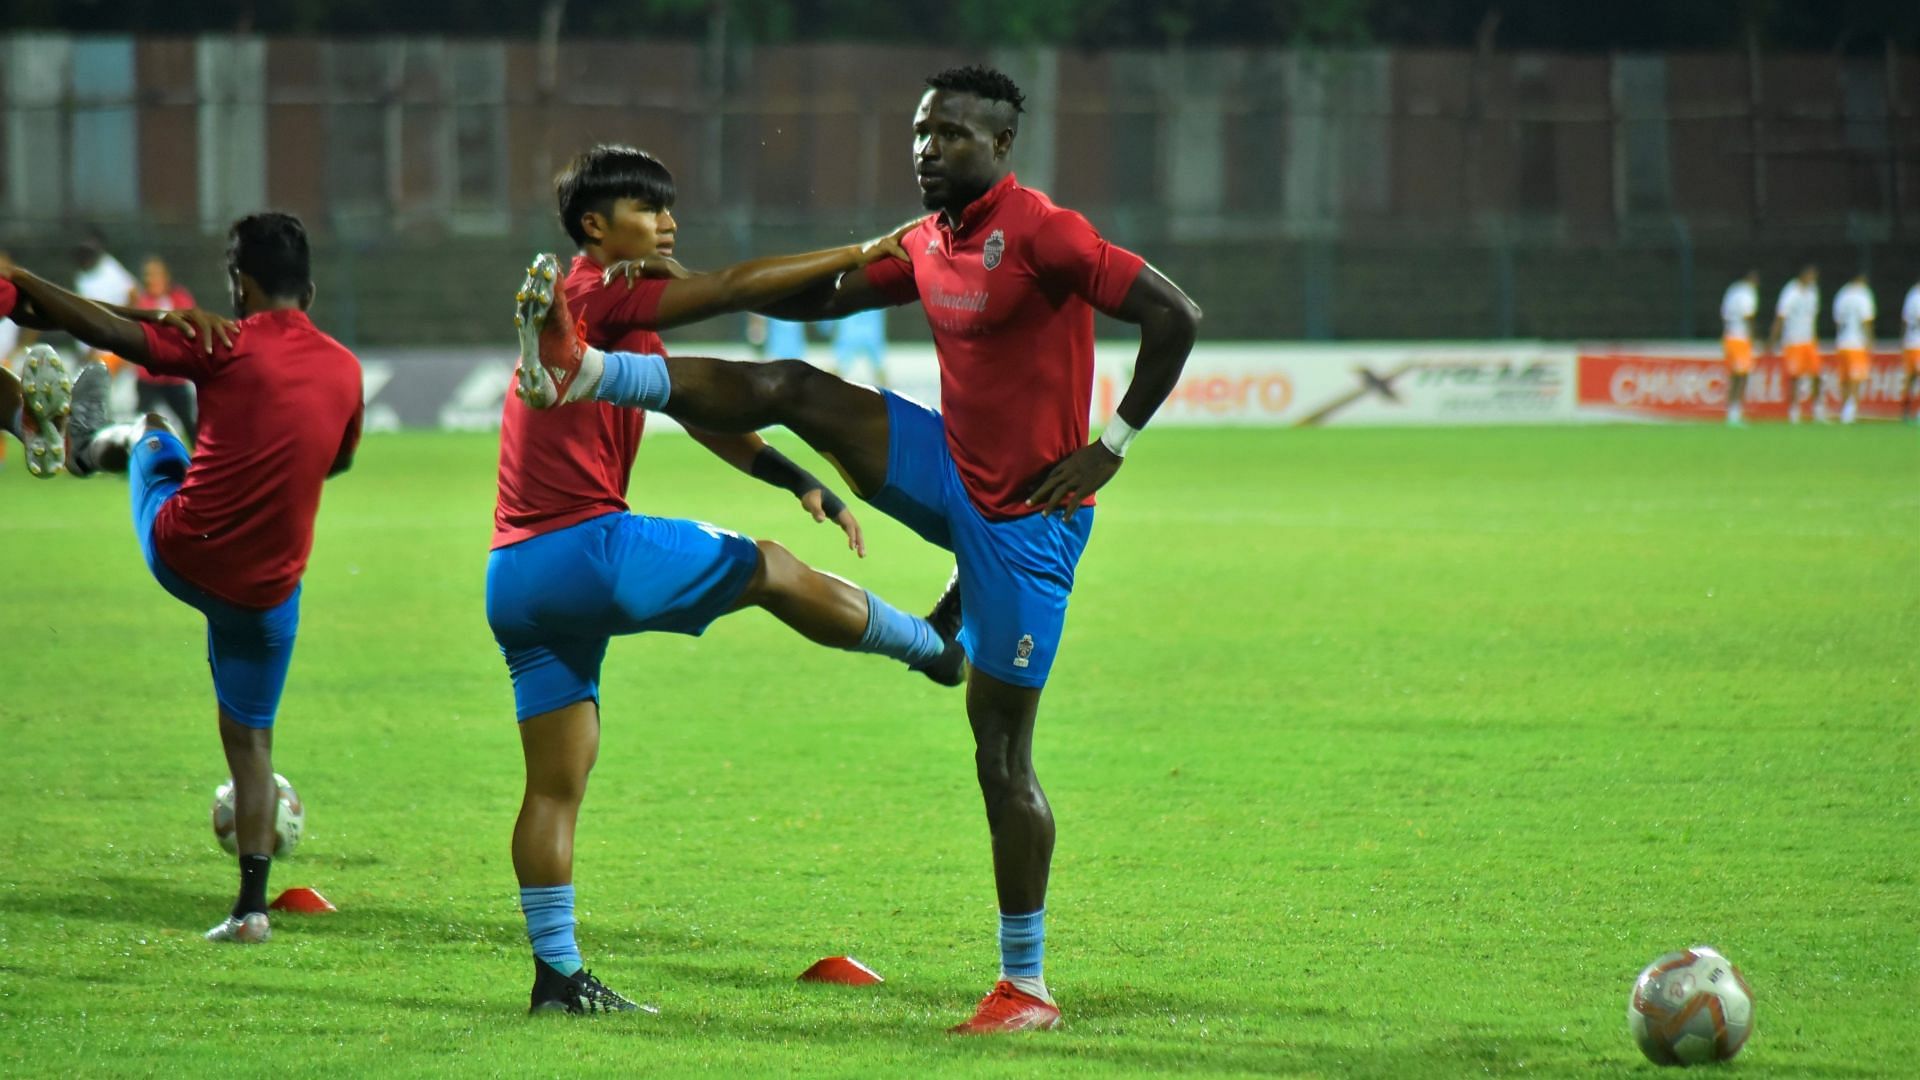 Churchill Brothers SC players training ahead of their clash against Sreenidi Deccan FC. (Image Courtesy: Twitter/ILeagueOfficial)